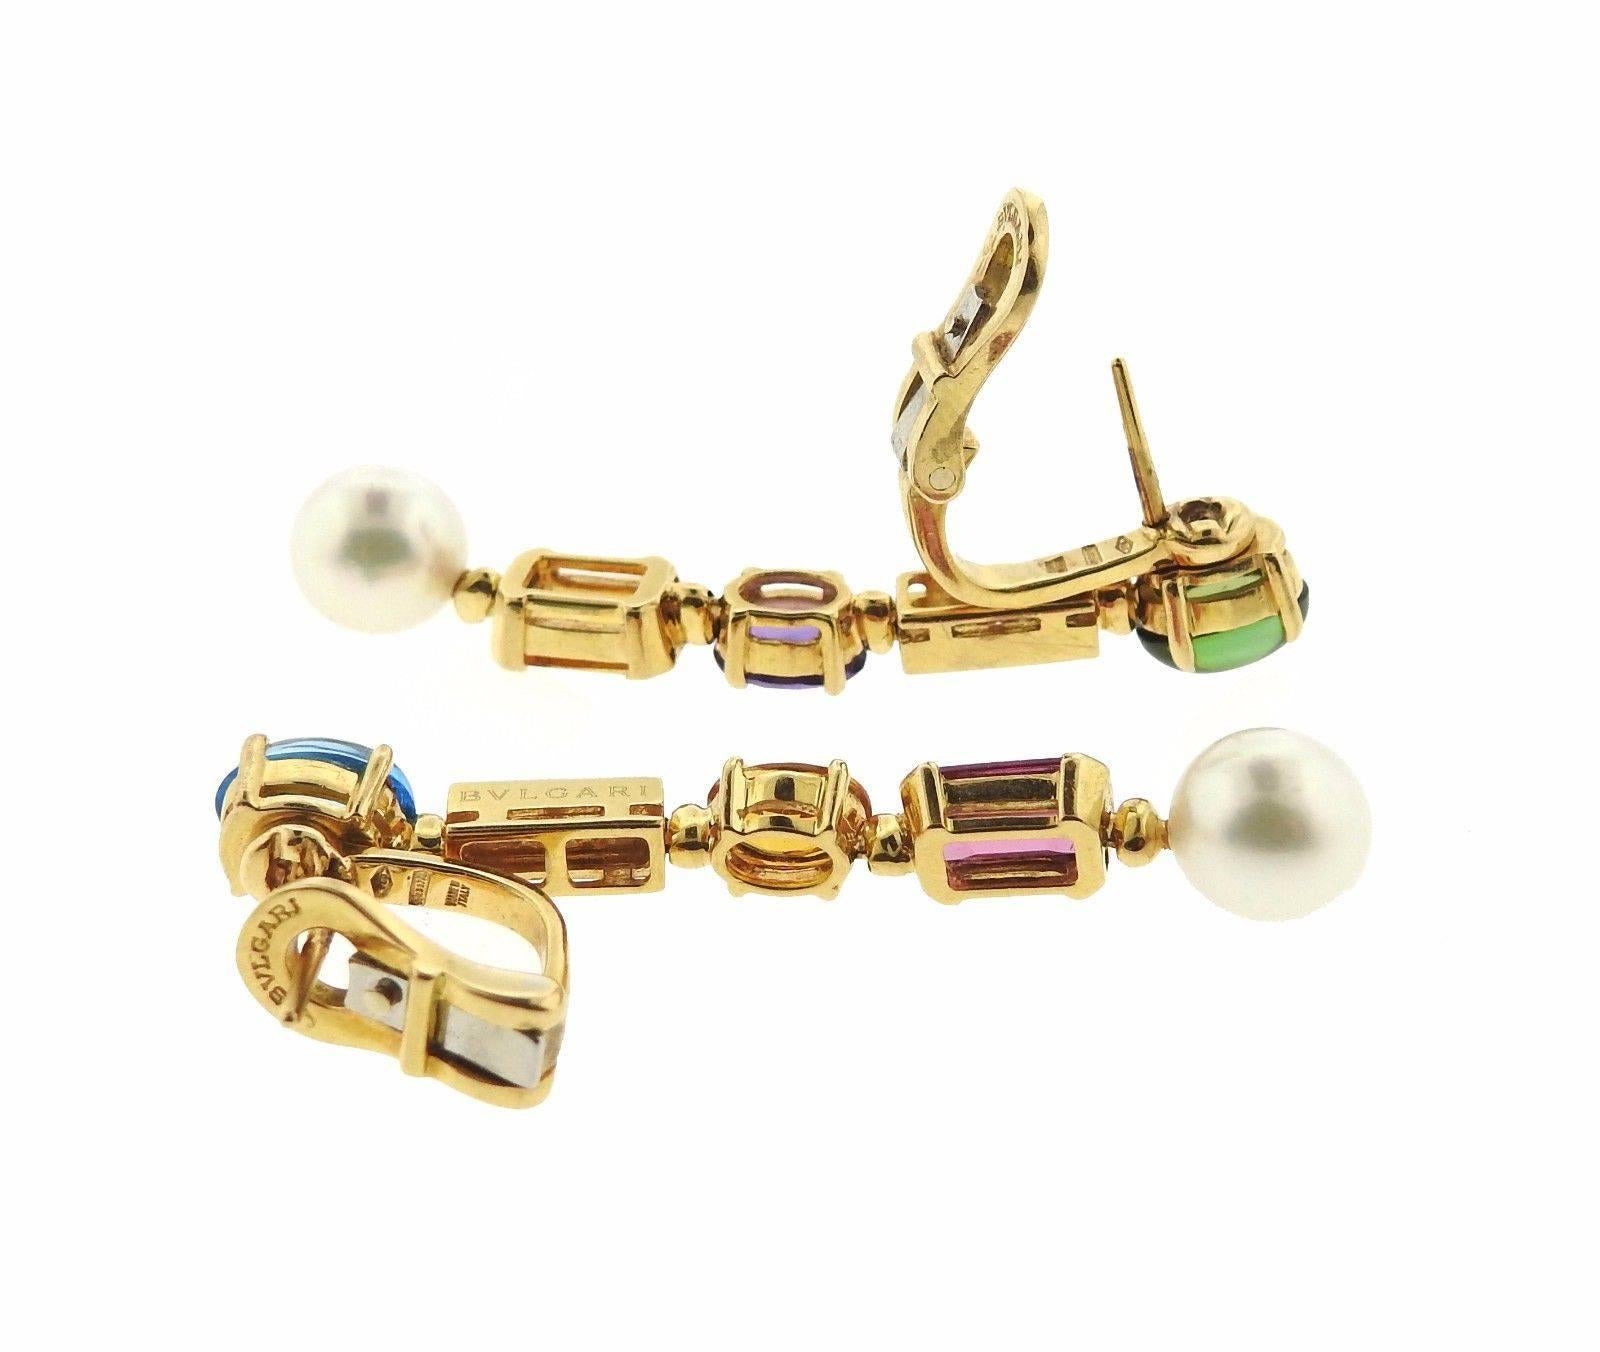 A pair of colorful 18k yellow gold drop earrings, crafted by Bulgari for Allegra collection, set with pearls, diamonds, amethyst, citrine, topaz, peridot and pink tourmaline gemstones. Earrings are 46mm long. Marked: Bvlgari, 750, made in Italy.